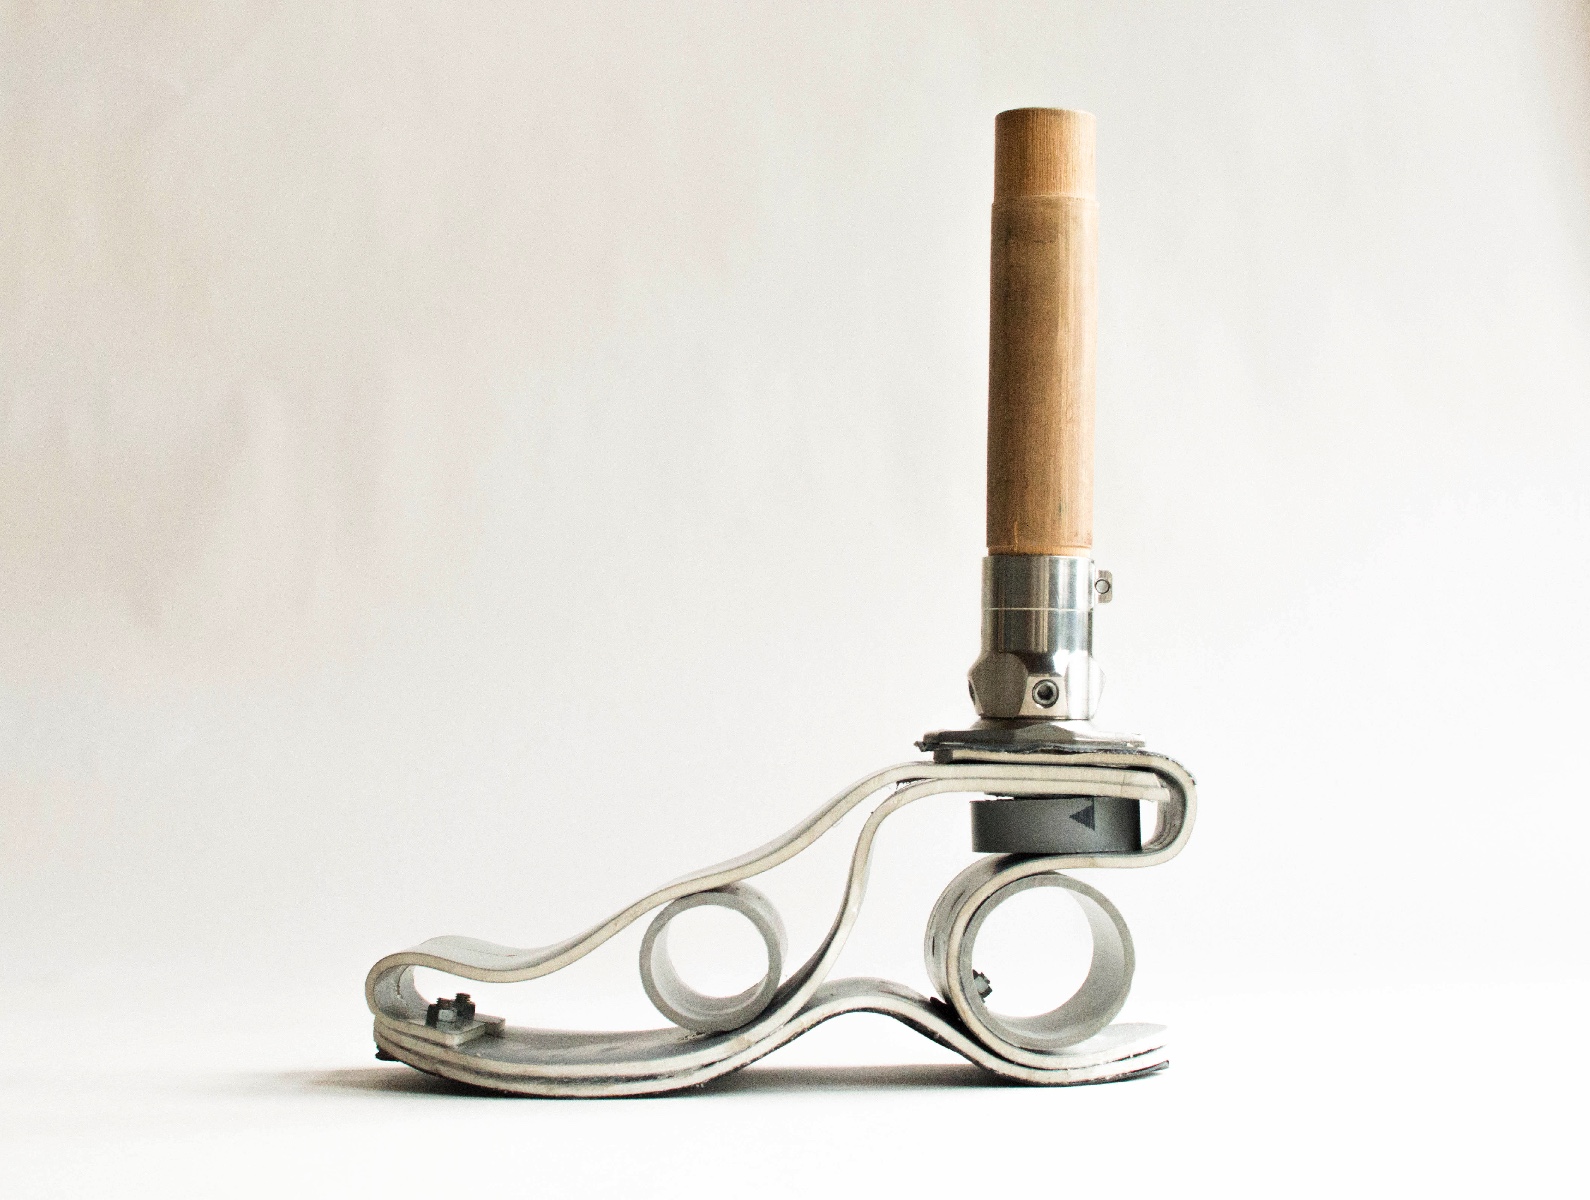 MakeHealth low-cost prosthesis